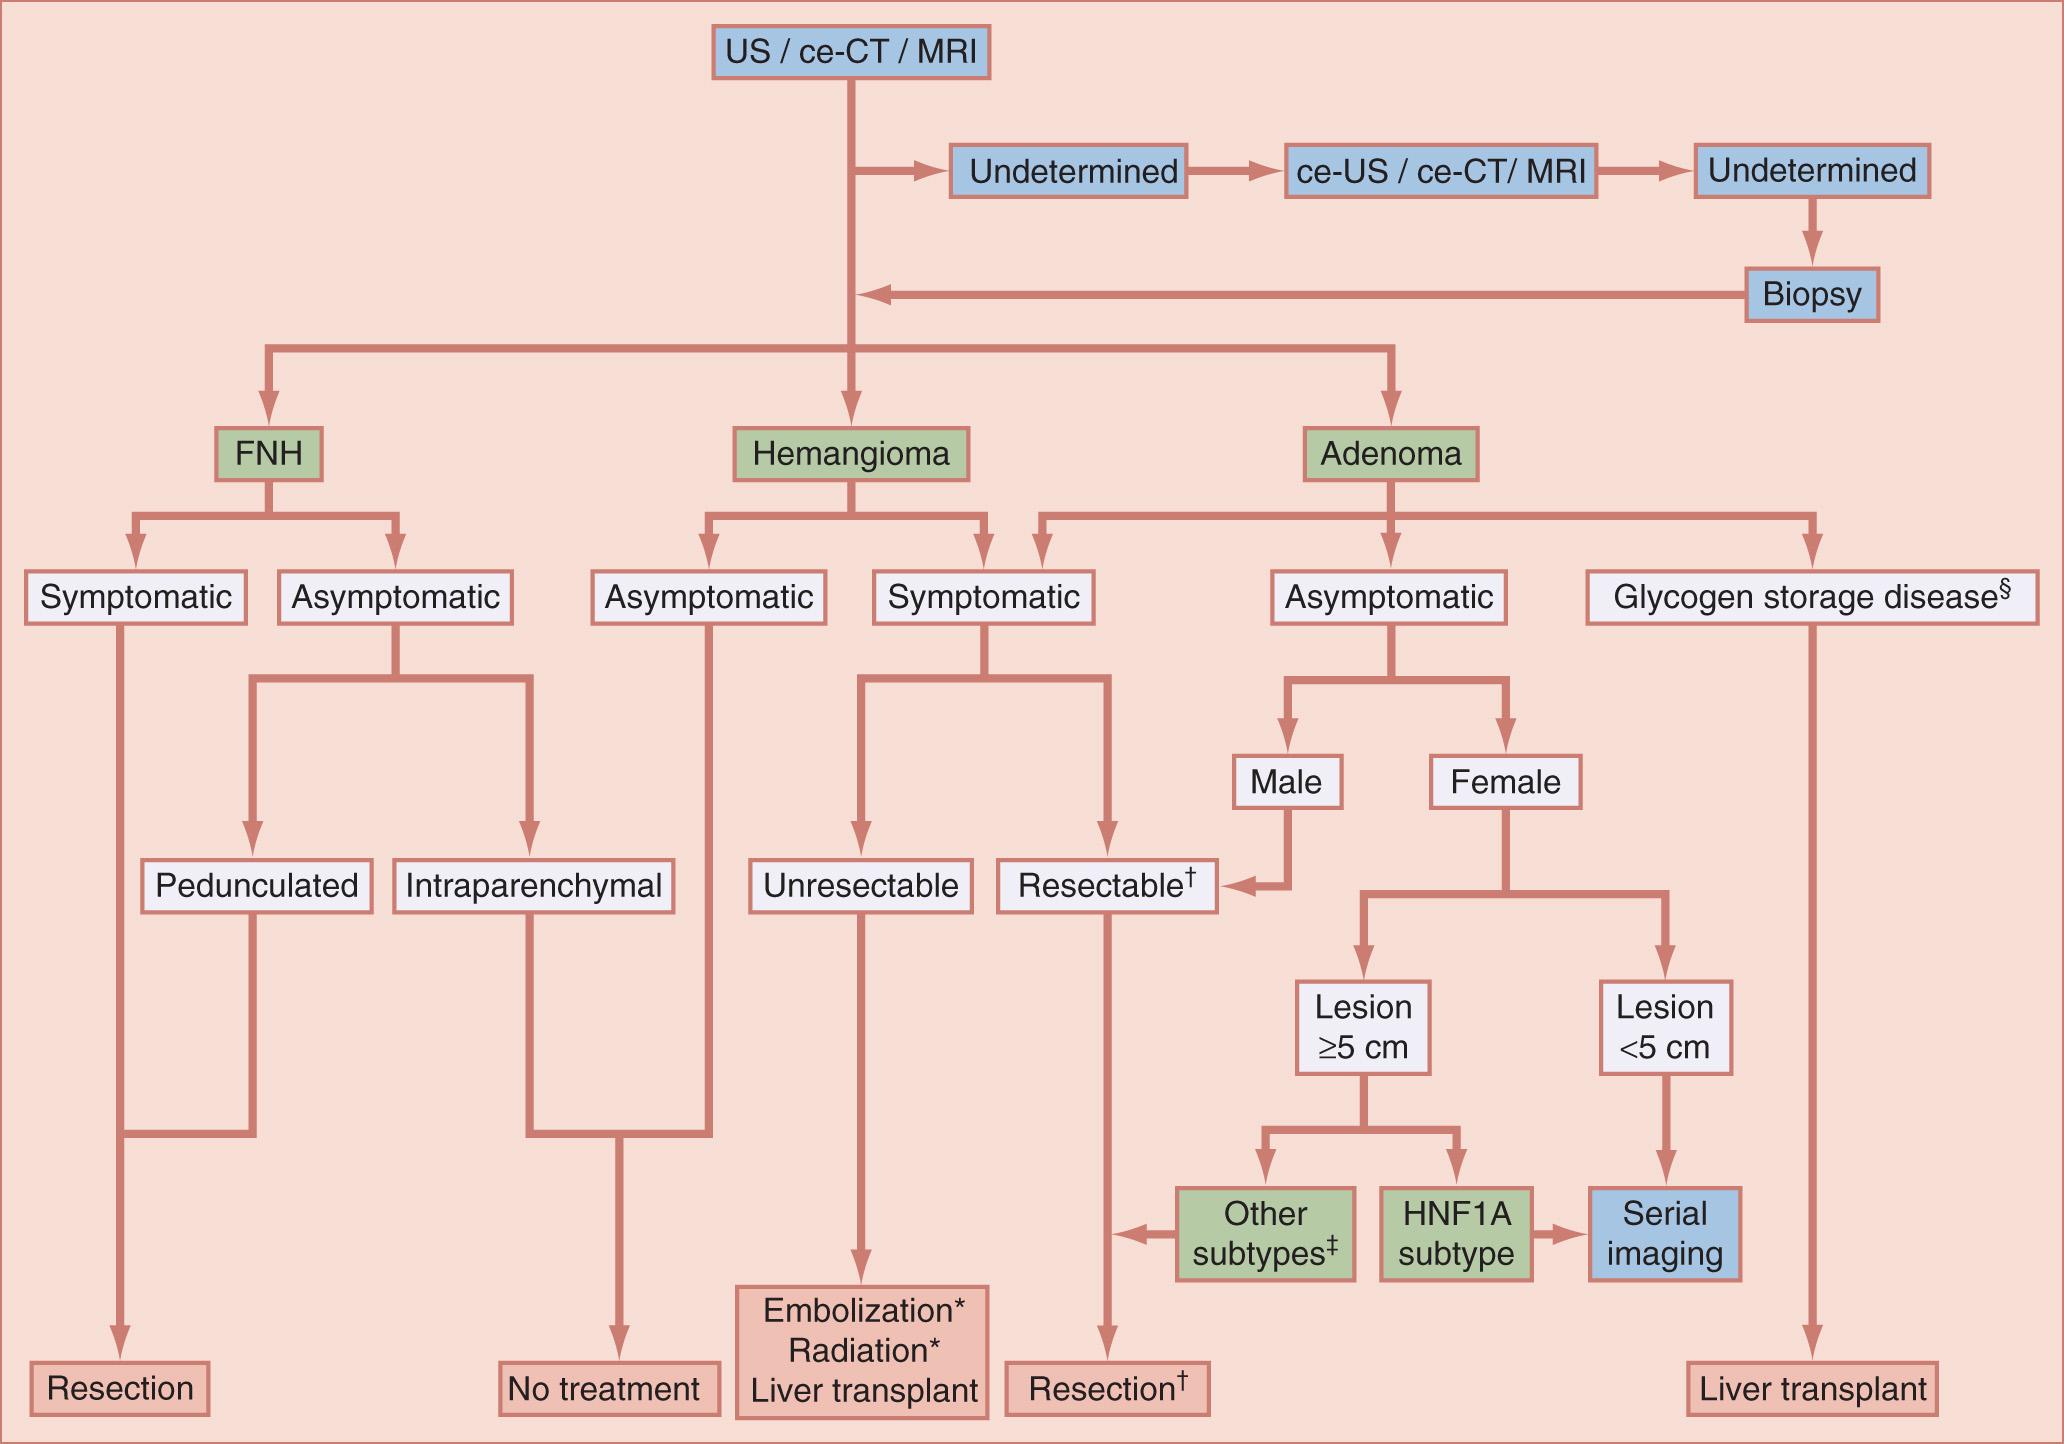 FIGURE 131.2, Flowchart depicting the diagnostic and therapeutic management for suspected focal benign liver lesion (hemangioma, FNH, adenoma) in noncirrhotic patients. *Embolization and radiation are accepted treatment options for hemangioma. † Instead of resection, enucleation of a hemangioma can be performed. ‡ IHCA, b-HCA, unclassified subtypes. § Glycogen storage diseases that are indications for liver transplantation include glycogenosis type 1a (defect in G6PC gene), type 4 (GBE1 gene defect) and type 9 (PHKG2 gene defect), whereby type 1a glycogenosis shows the strongest association with adenomatosis. 55 ce-US , Contrast-enhanced ultrasound; ce-CT , contrast-enhanced computed tomography, FNH, focal nodular hyperplasia; MRI, magnetic resonance imaging; IHCA, inflammatory hepatocellular adenoma; b-HCA, β-catenin–mutated hepatocellular adenoma; HNF1A, HNF1α-mutated hepatocellular adenoma.